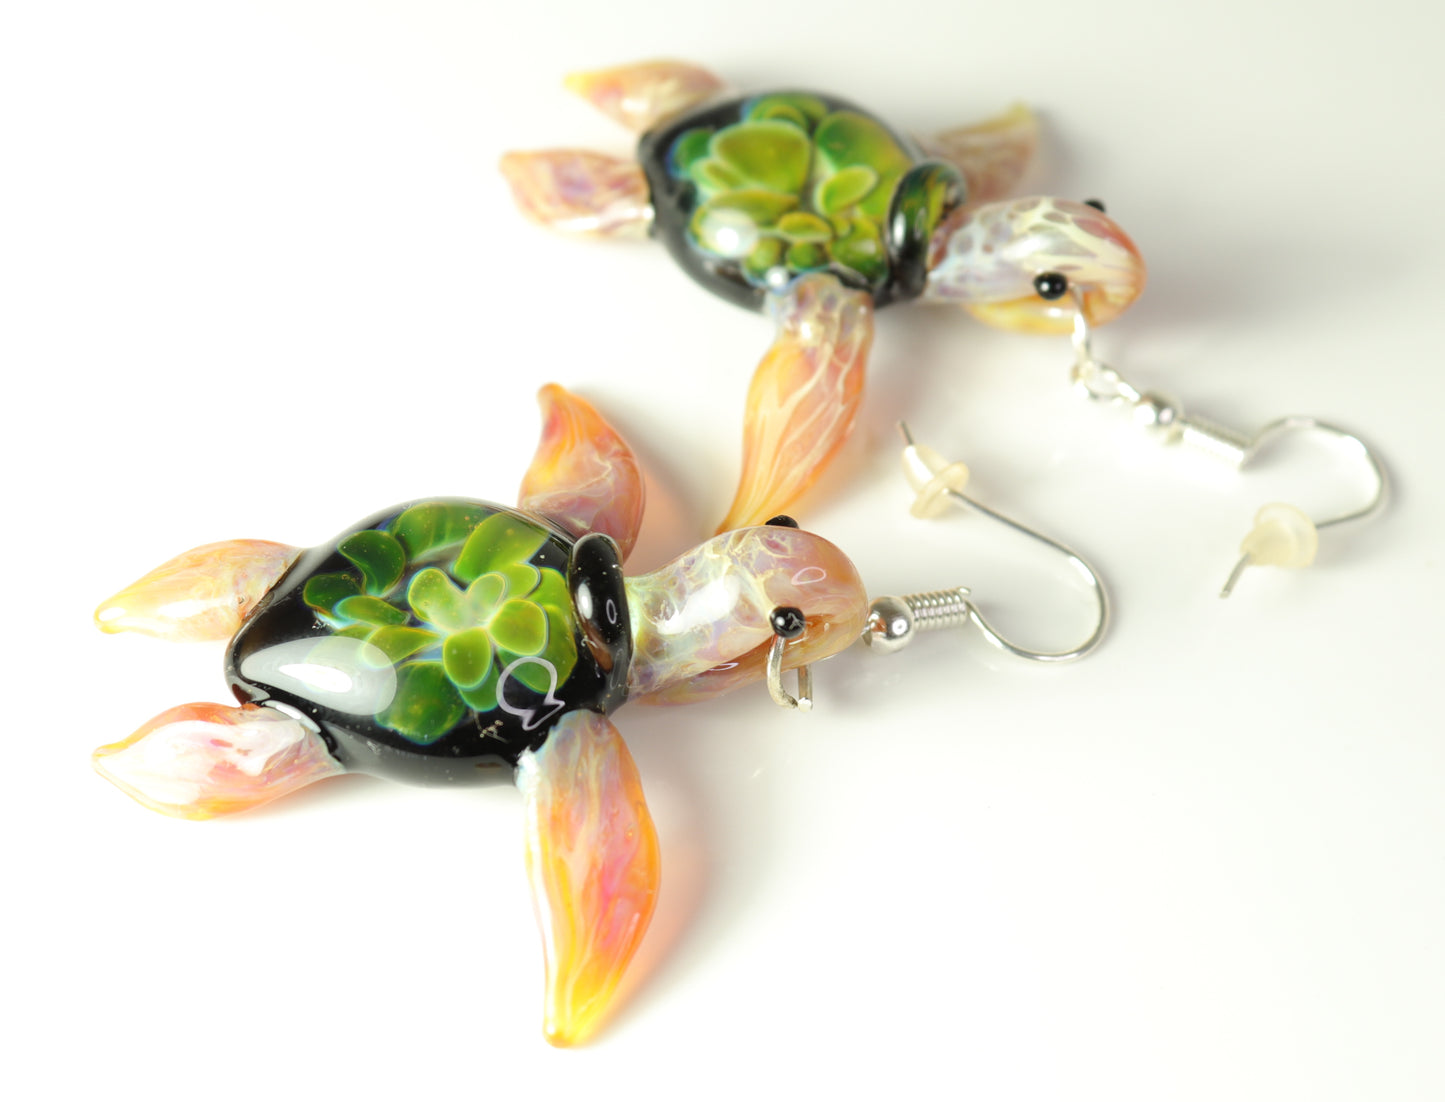 Exquisite Hawaiian Sea Turtle: Handcrafted Glass Earrings with Coral Reef Inside the Shell